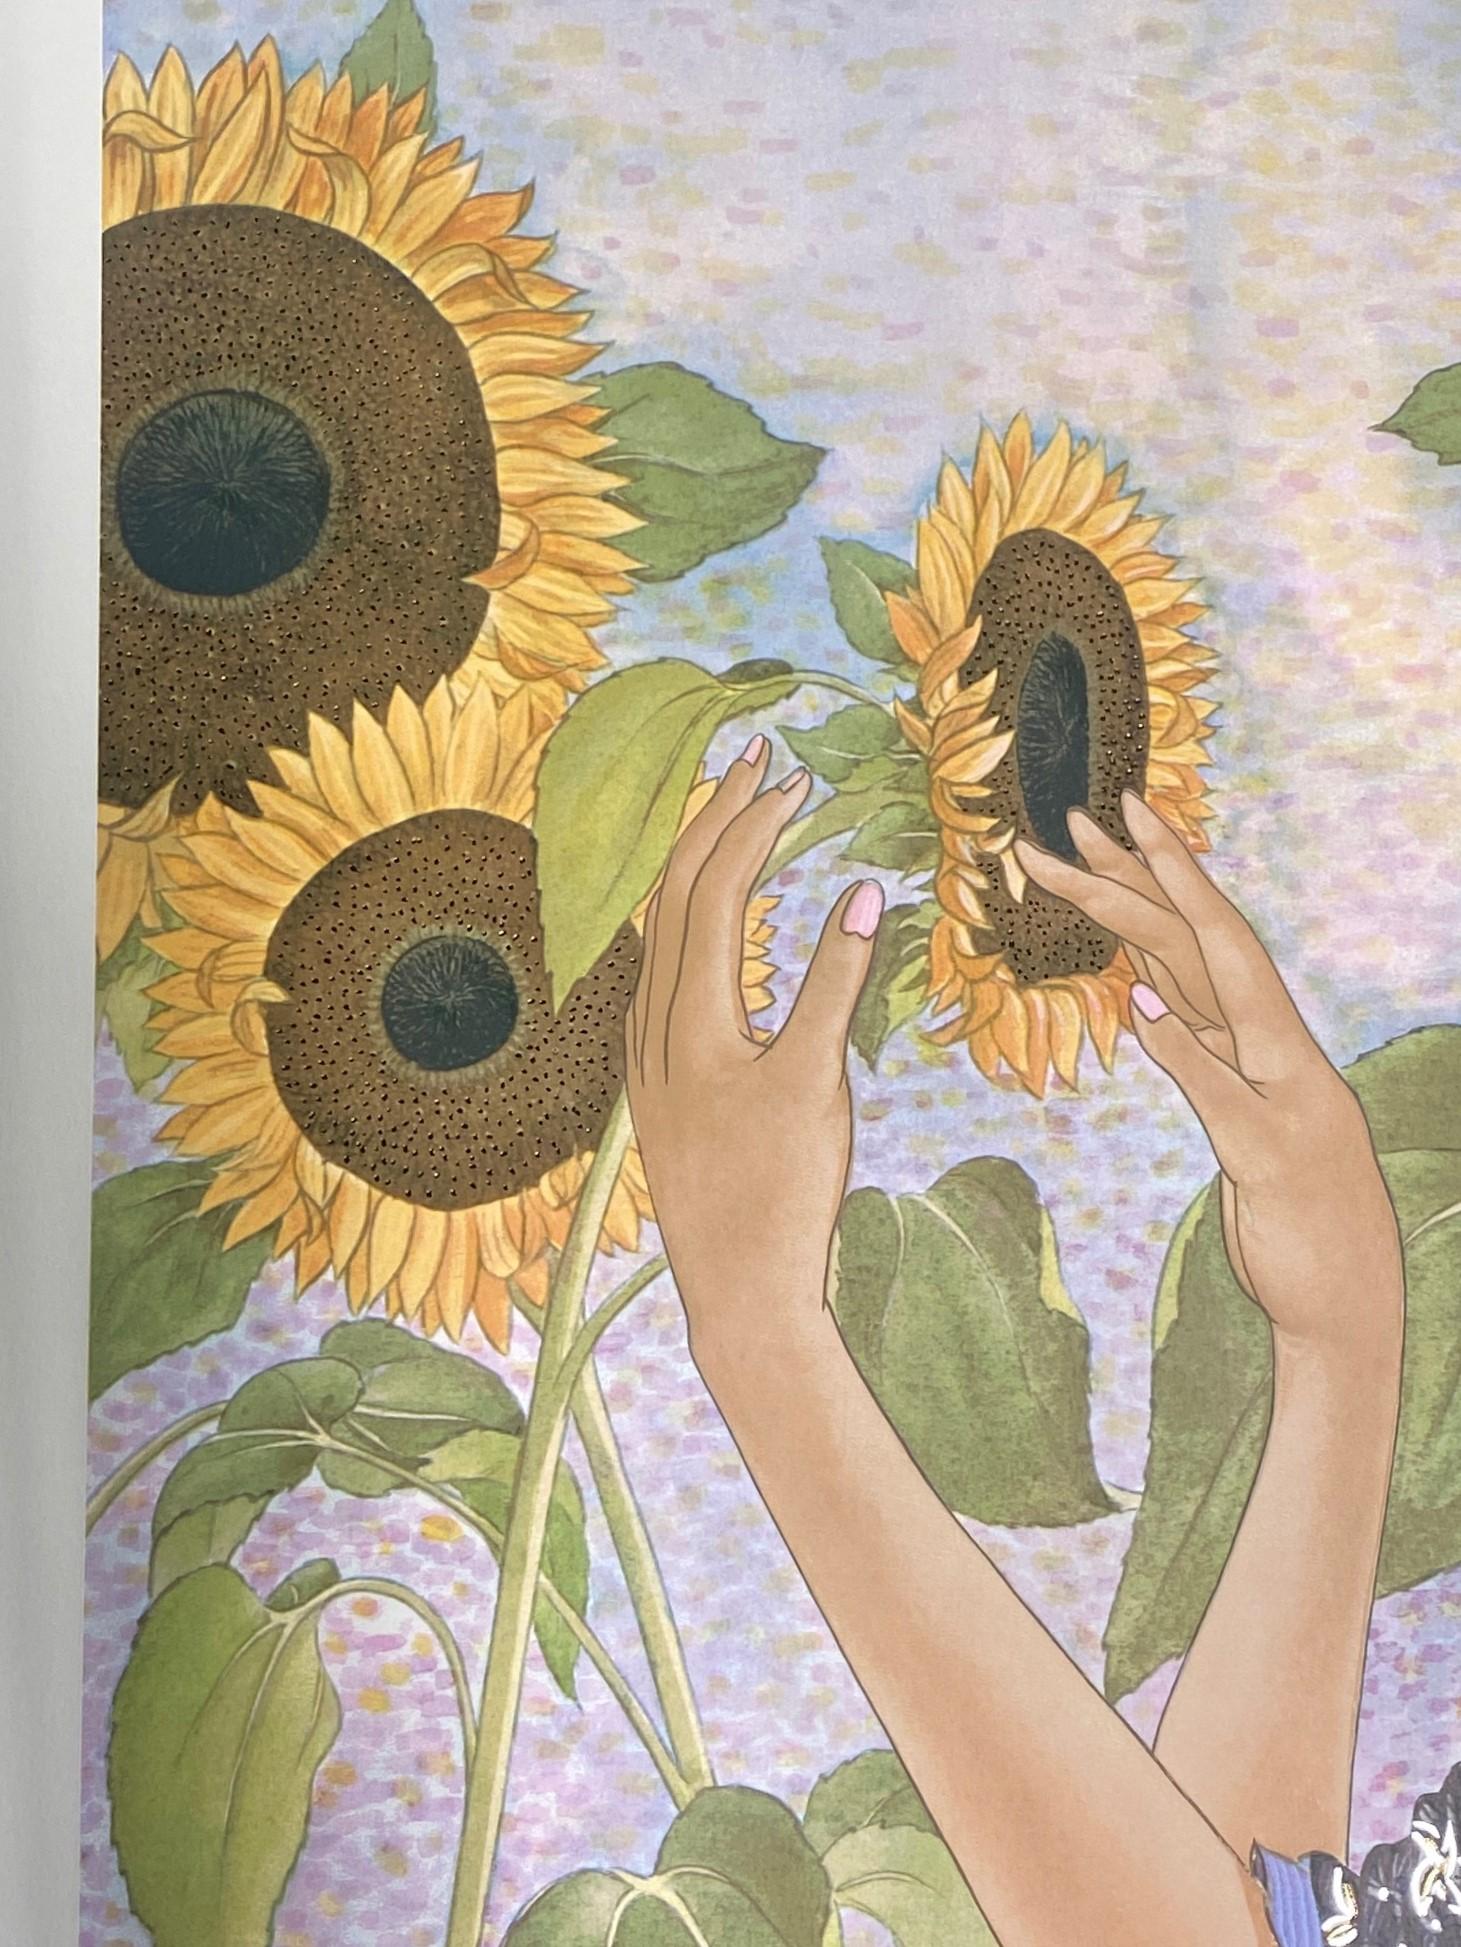 Muramasa Kudo Signed Limited Edition Japanese Serigraph Print Sunflowers In Good Condition For Sale In Studio City, CA